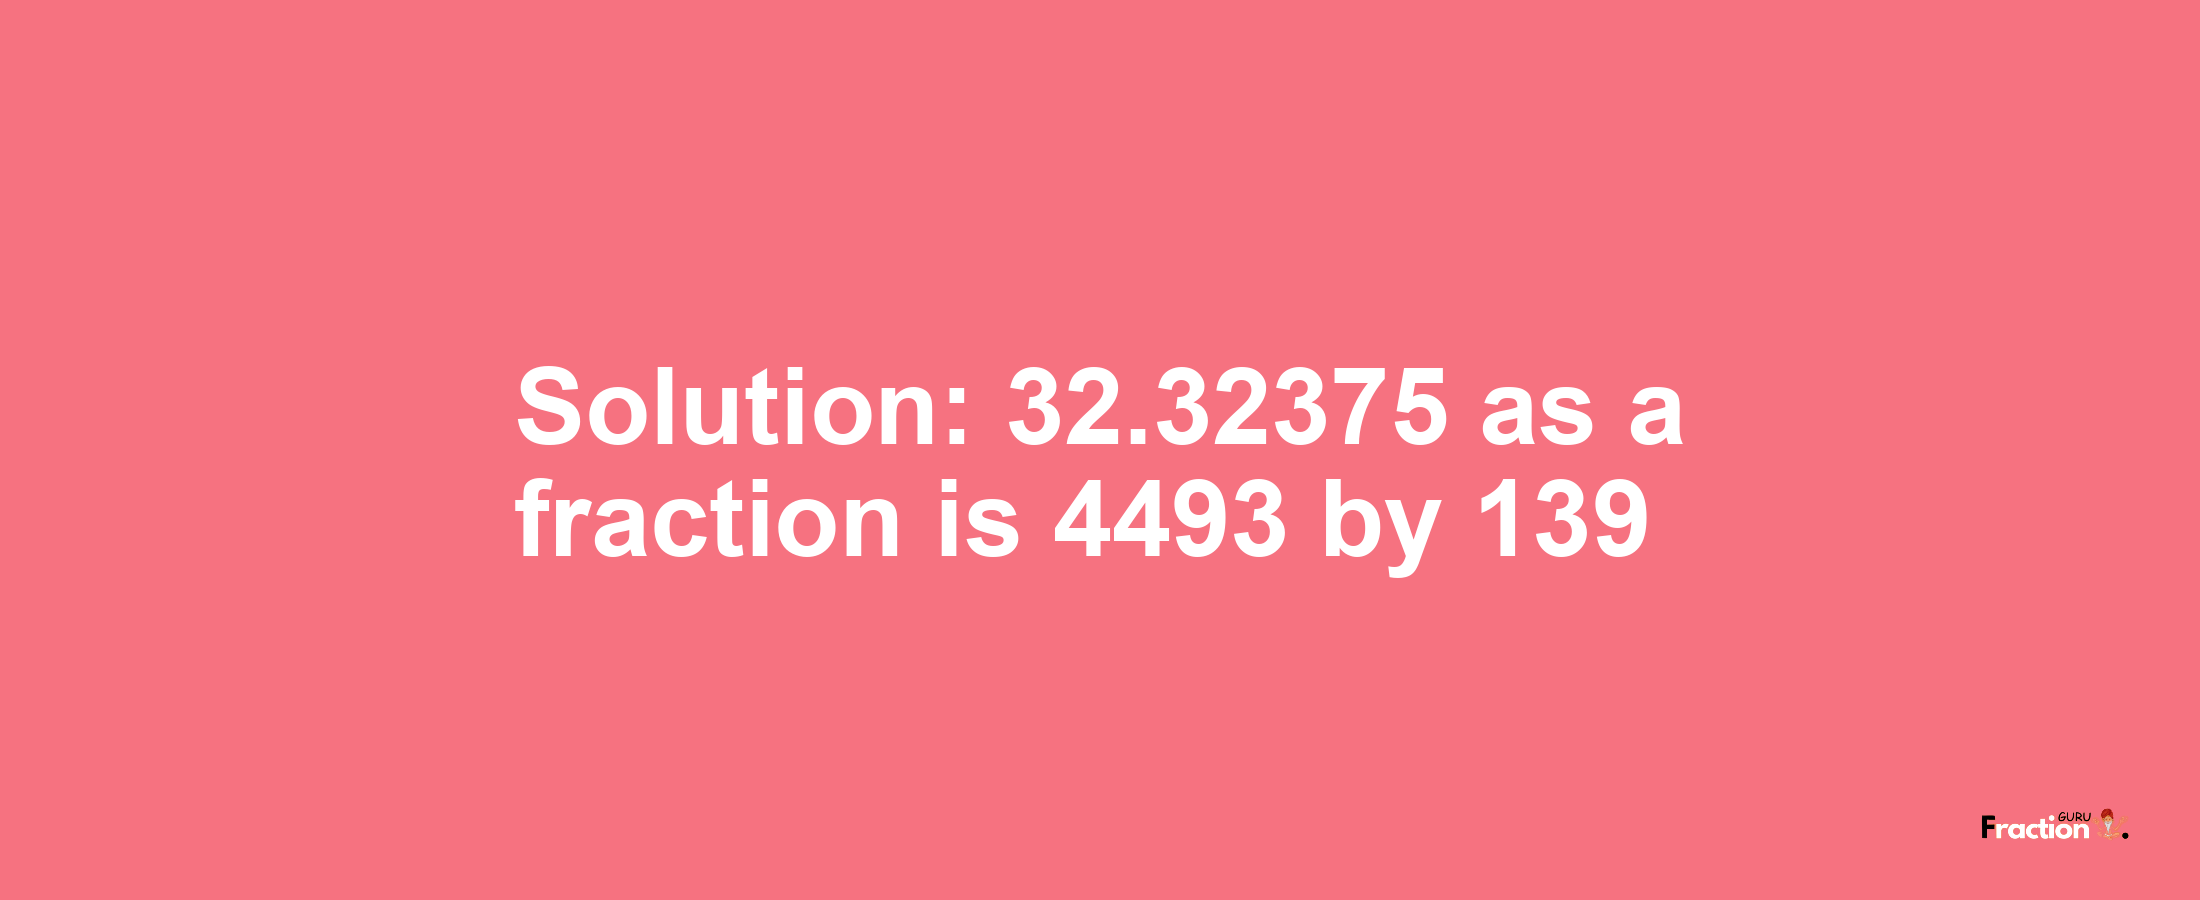 Solution:32.32375 as a fraction is 4493/139